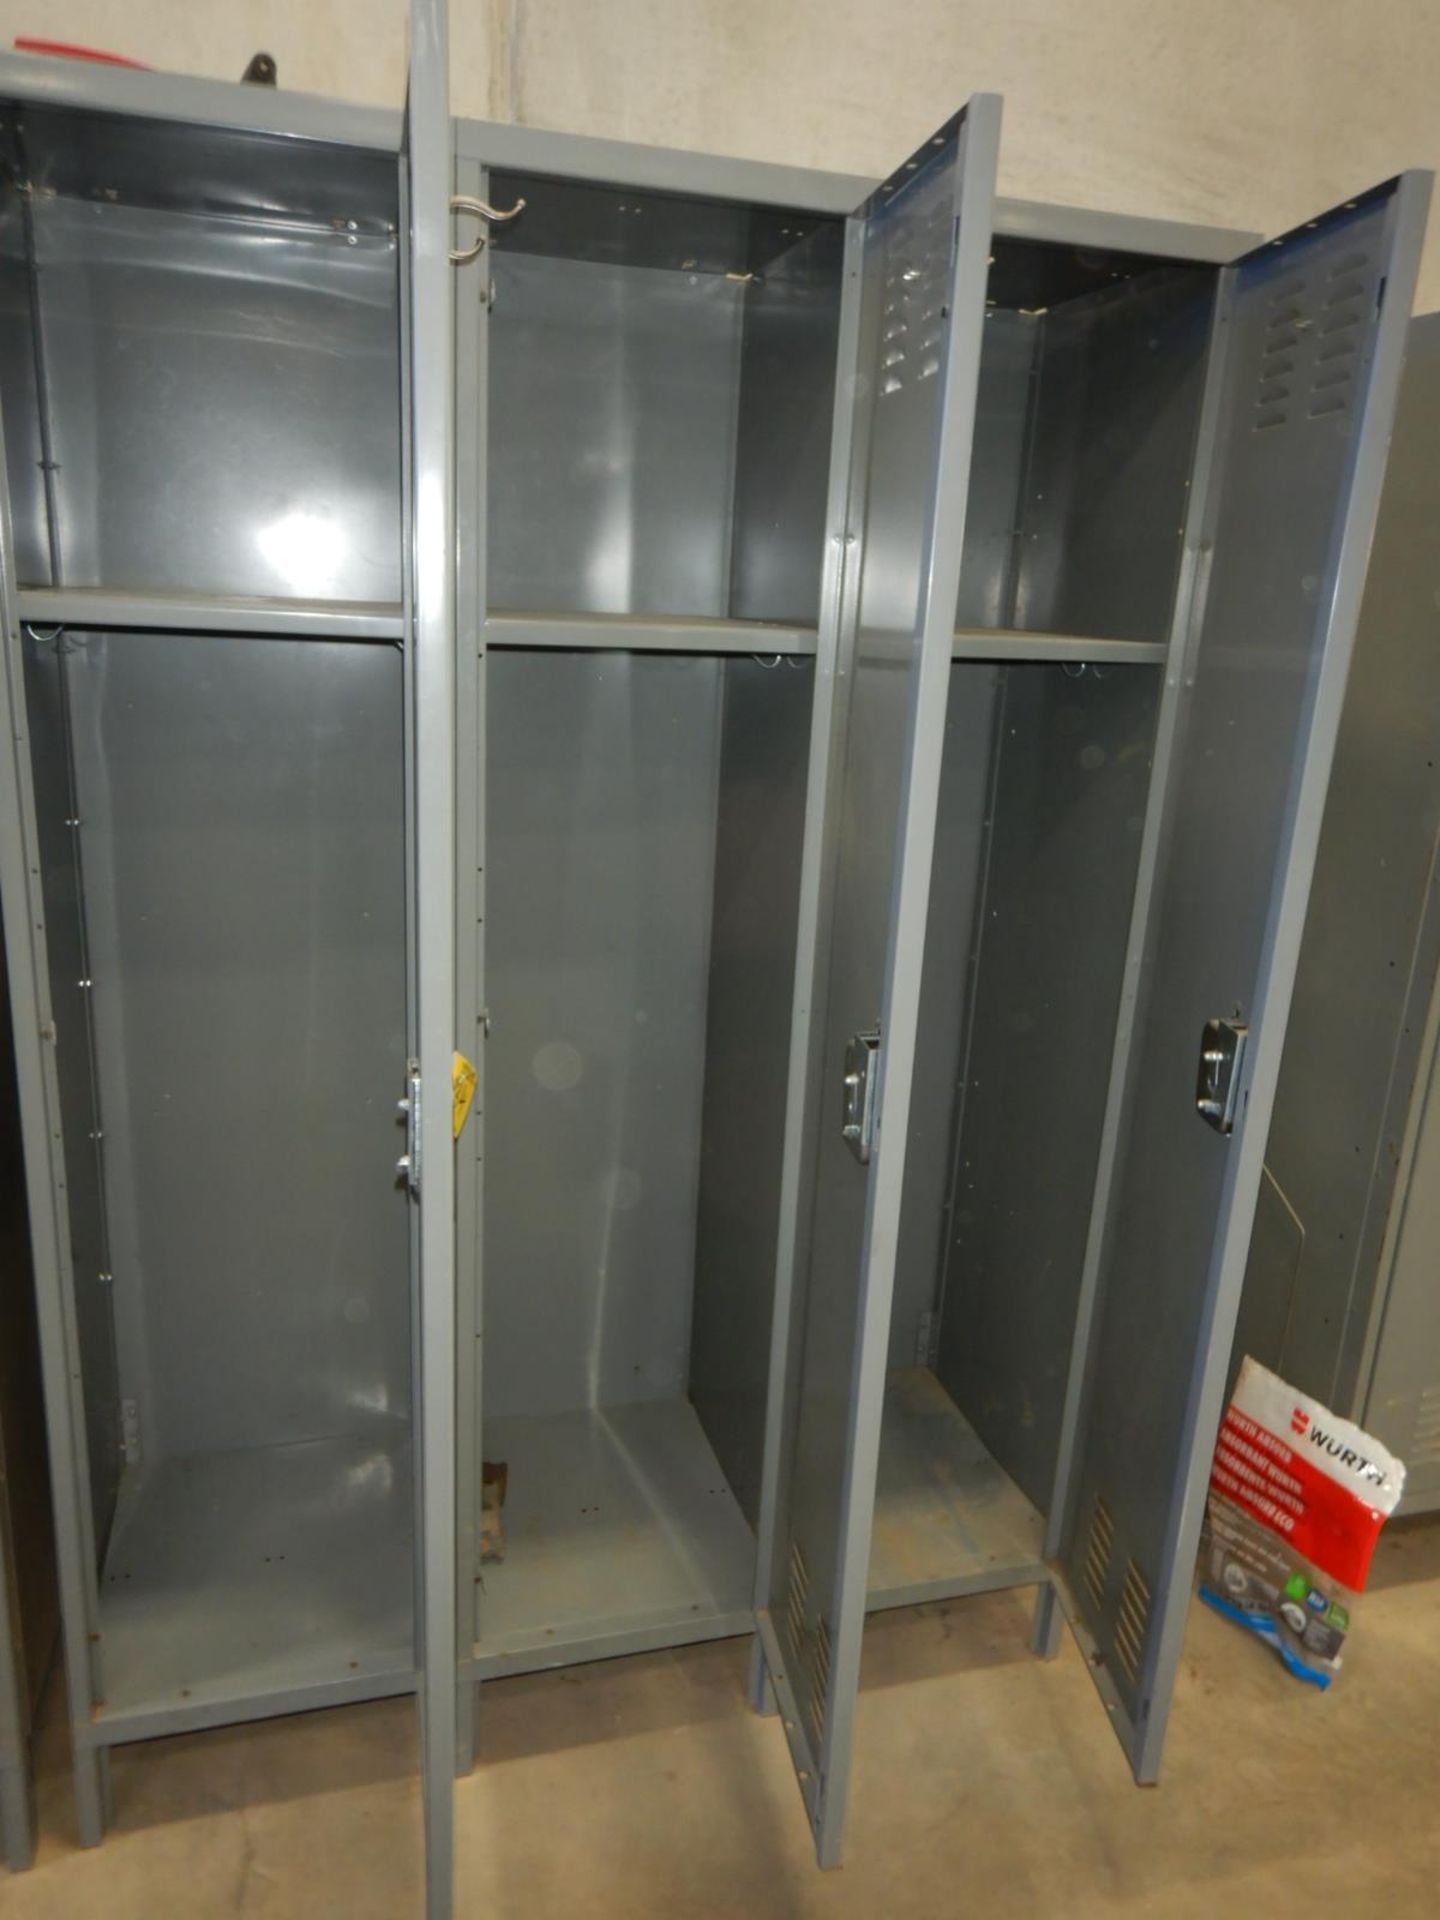 SET OF 3 CLOTHING LOCKERS - 16IN W X 20 IN D X 72IN H - Image 2 of 2